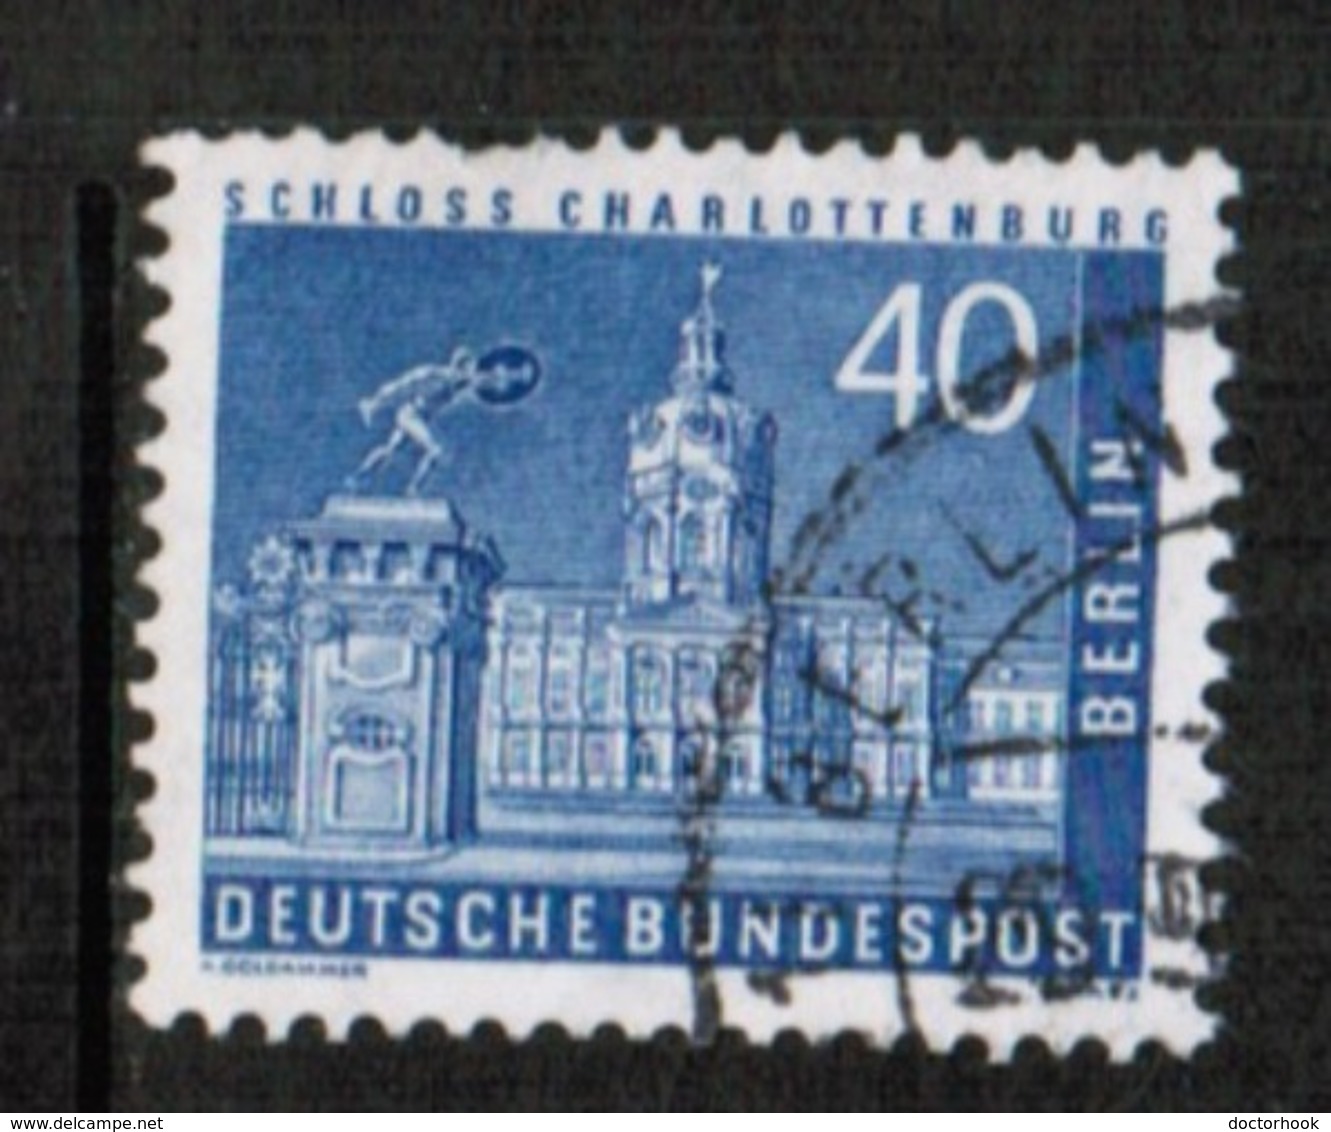 GERMANY---BERLIN  Scott # 9N 131 USED FAULTS (Stamp Scan # 463) - Used Stamps